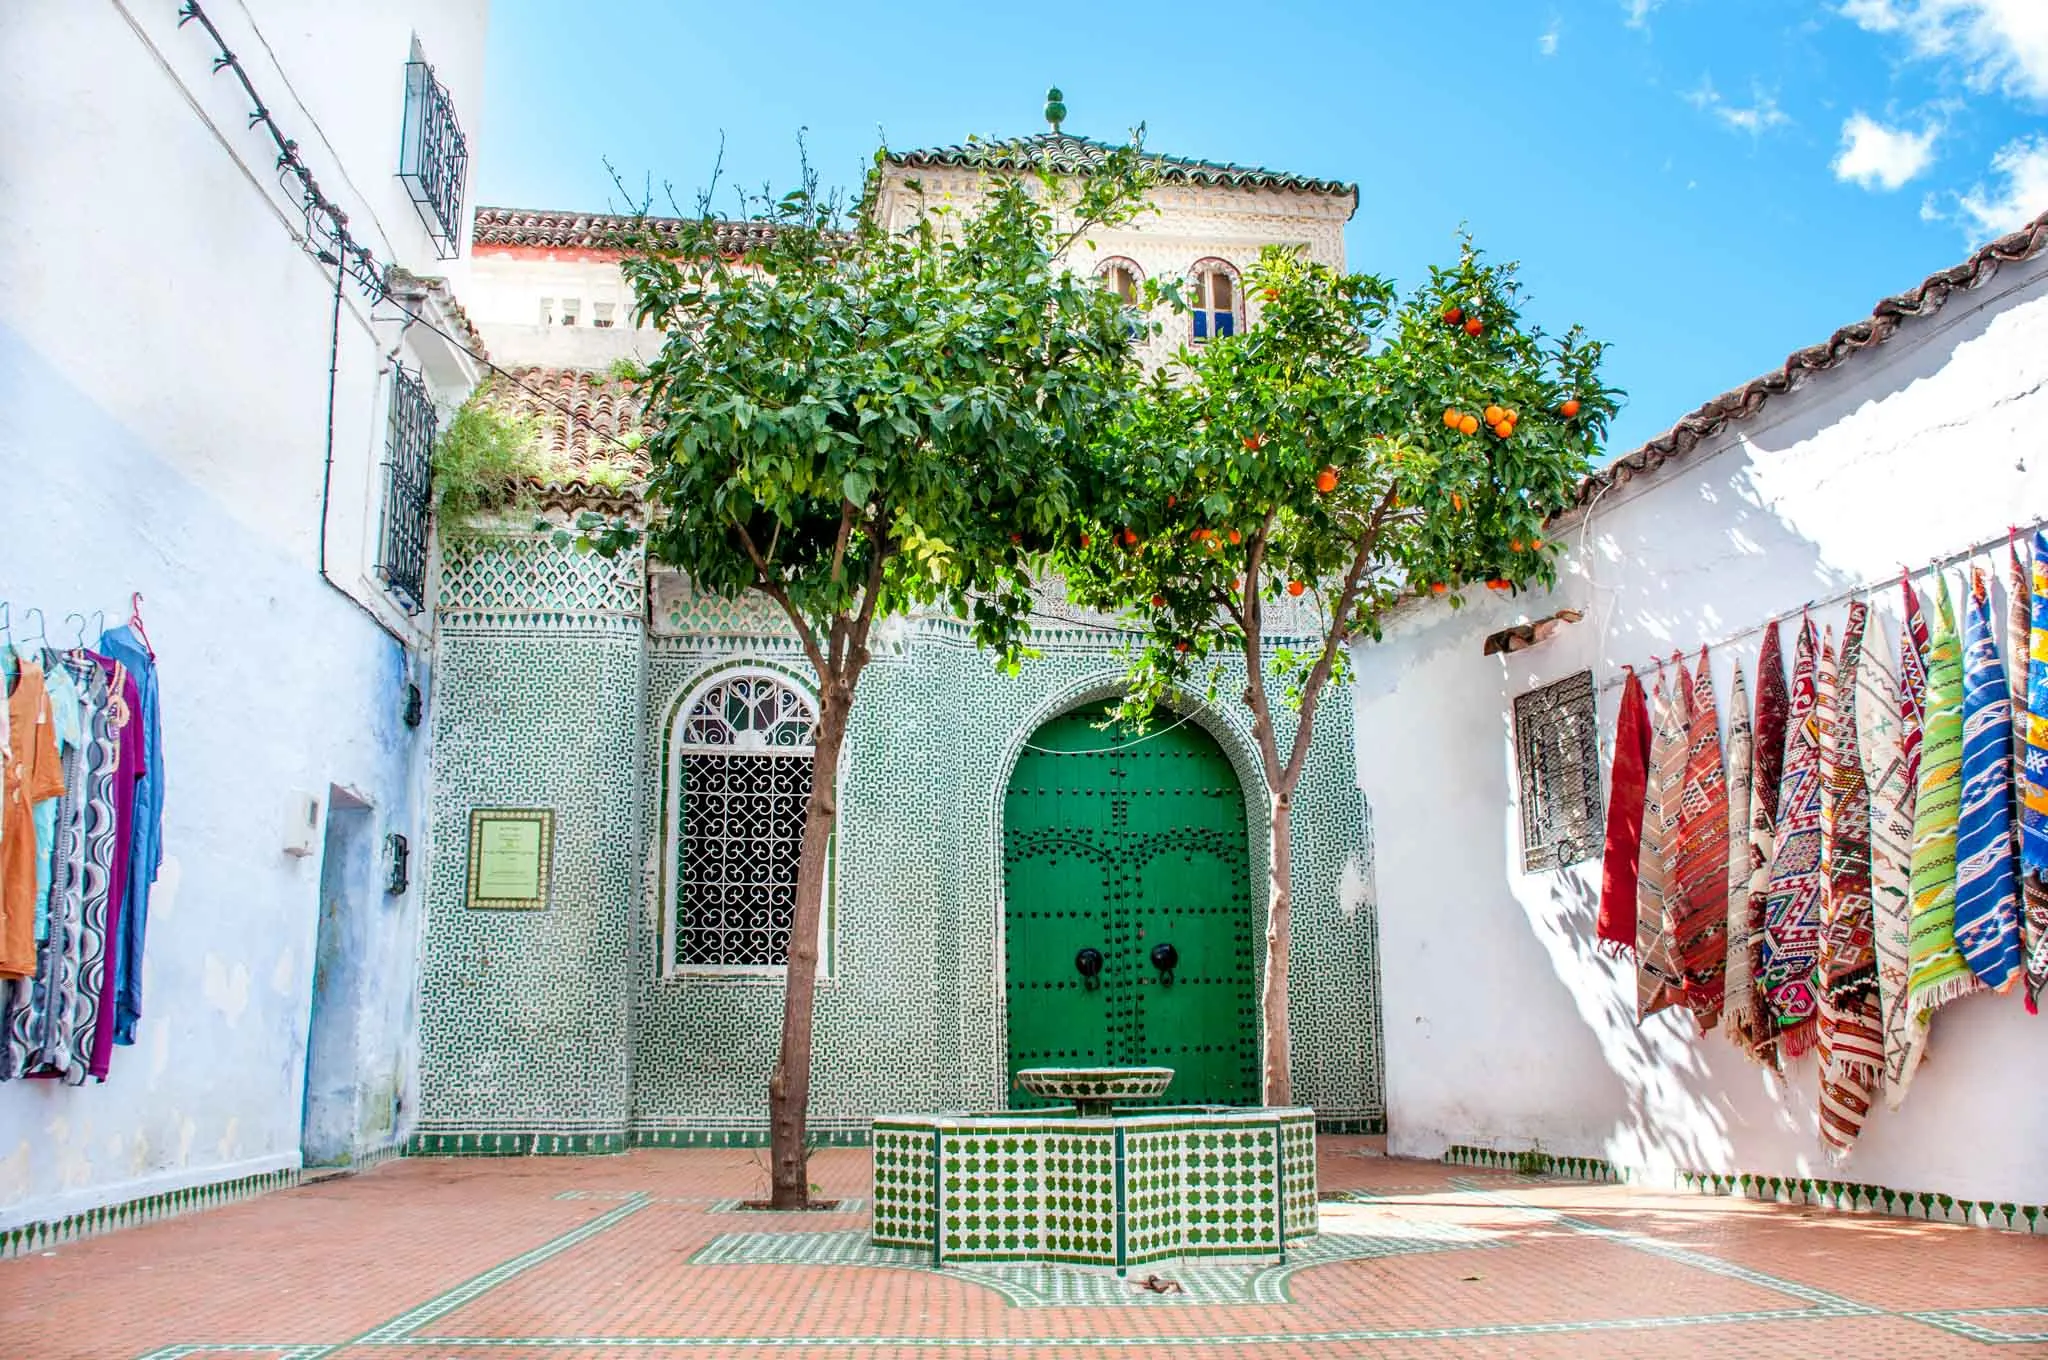 Green tiled courtyard with orange trees in the middle